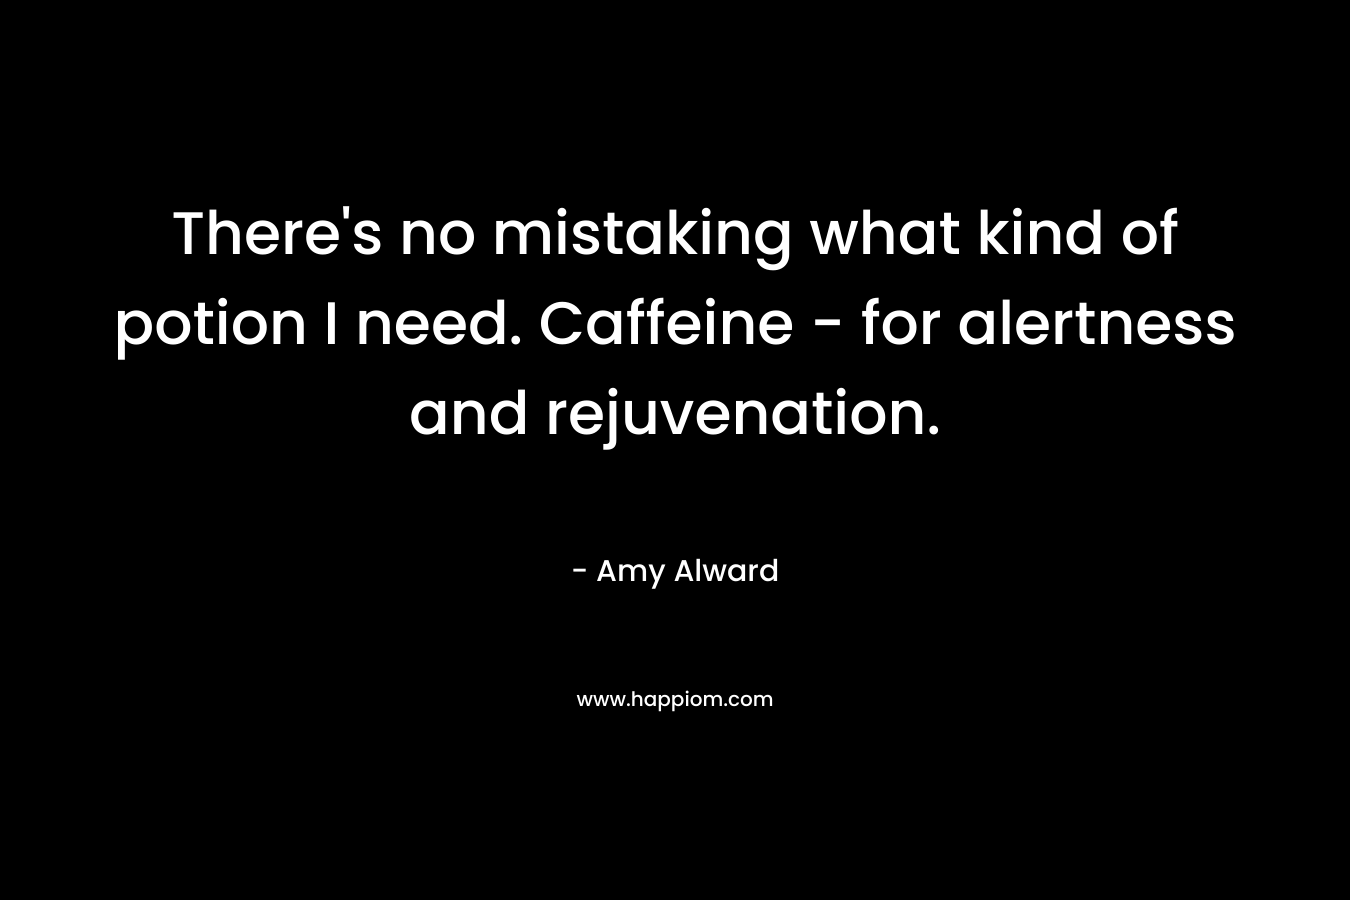 There’s no mistaking what kind of potion I need. Caffeine – for alertness and rejuvenation. – Amy Alward